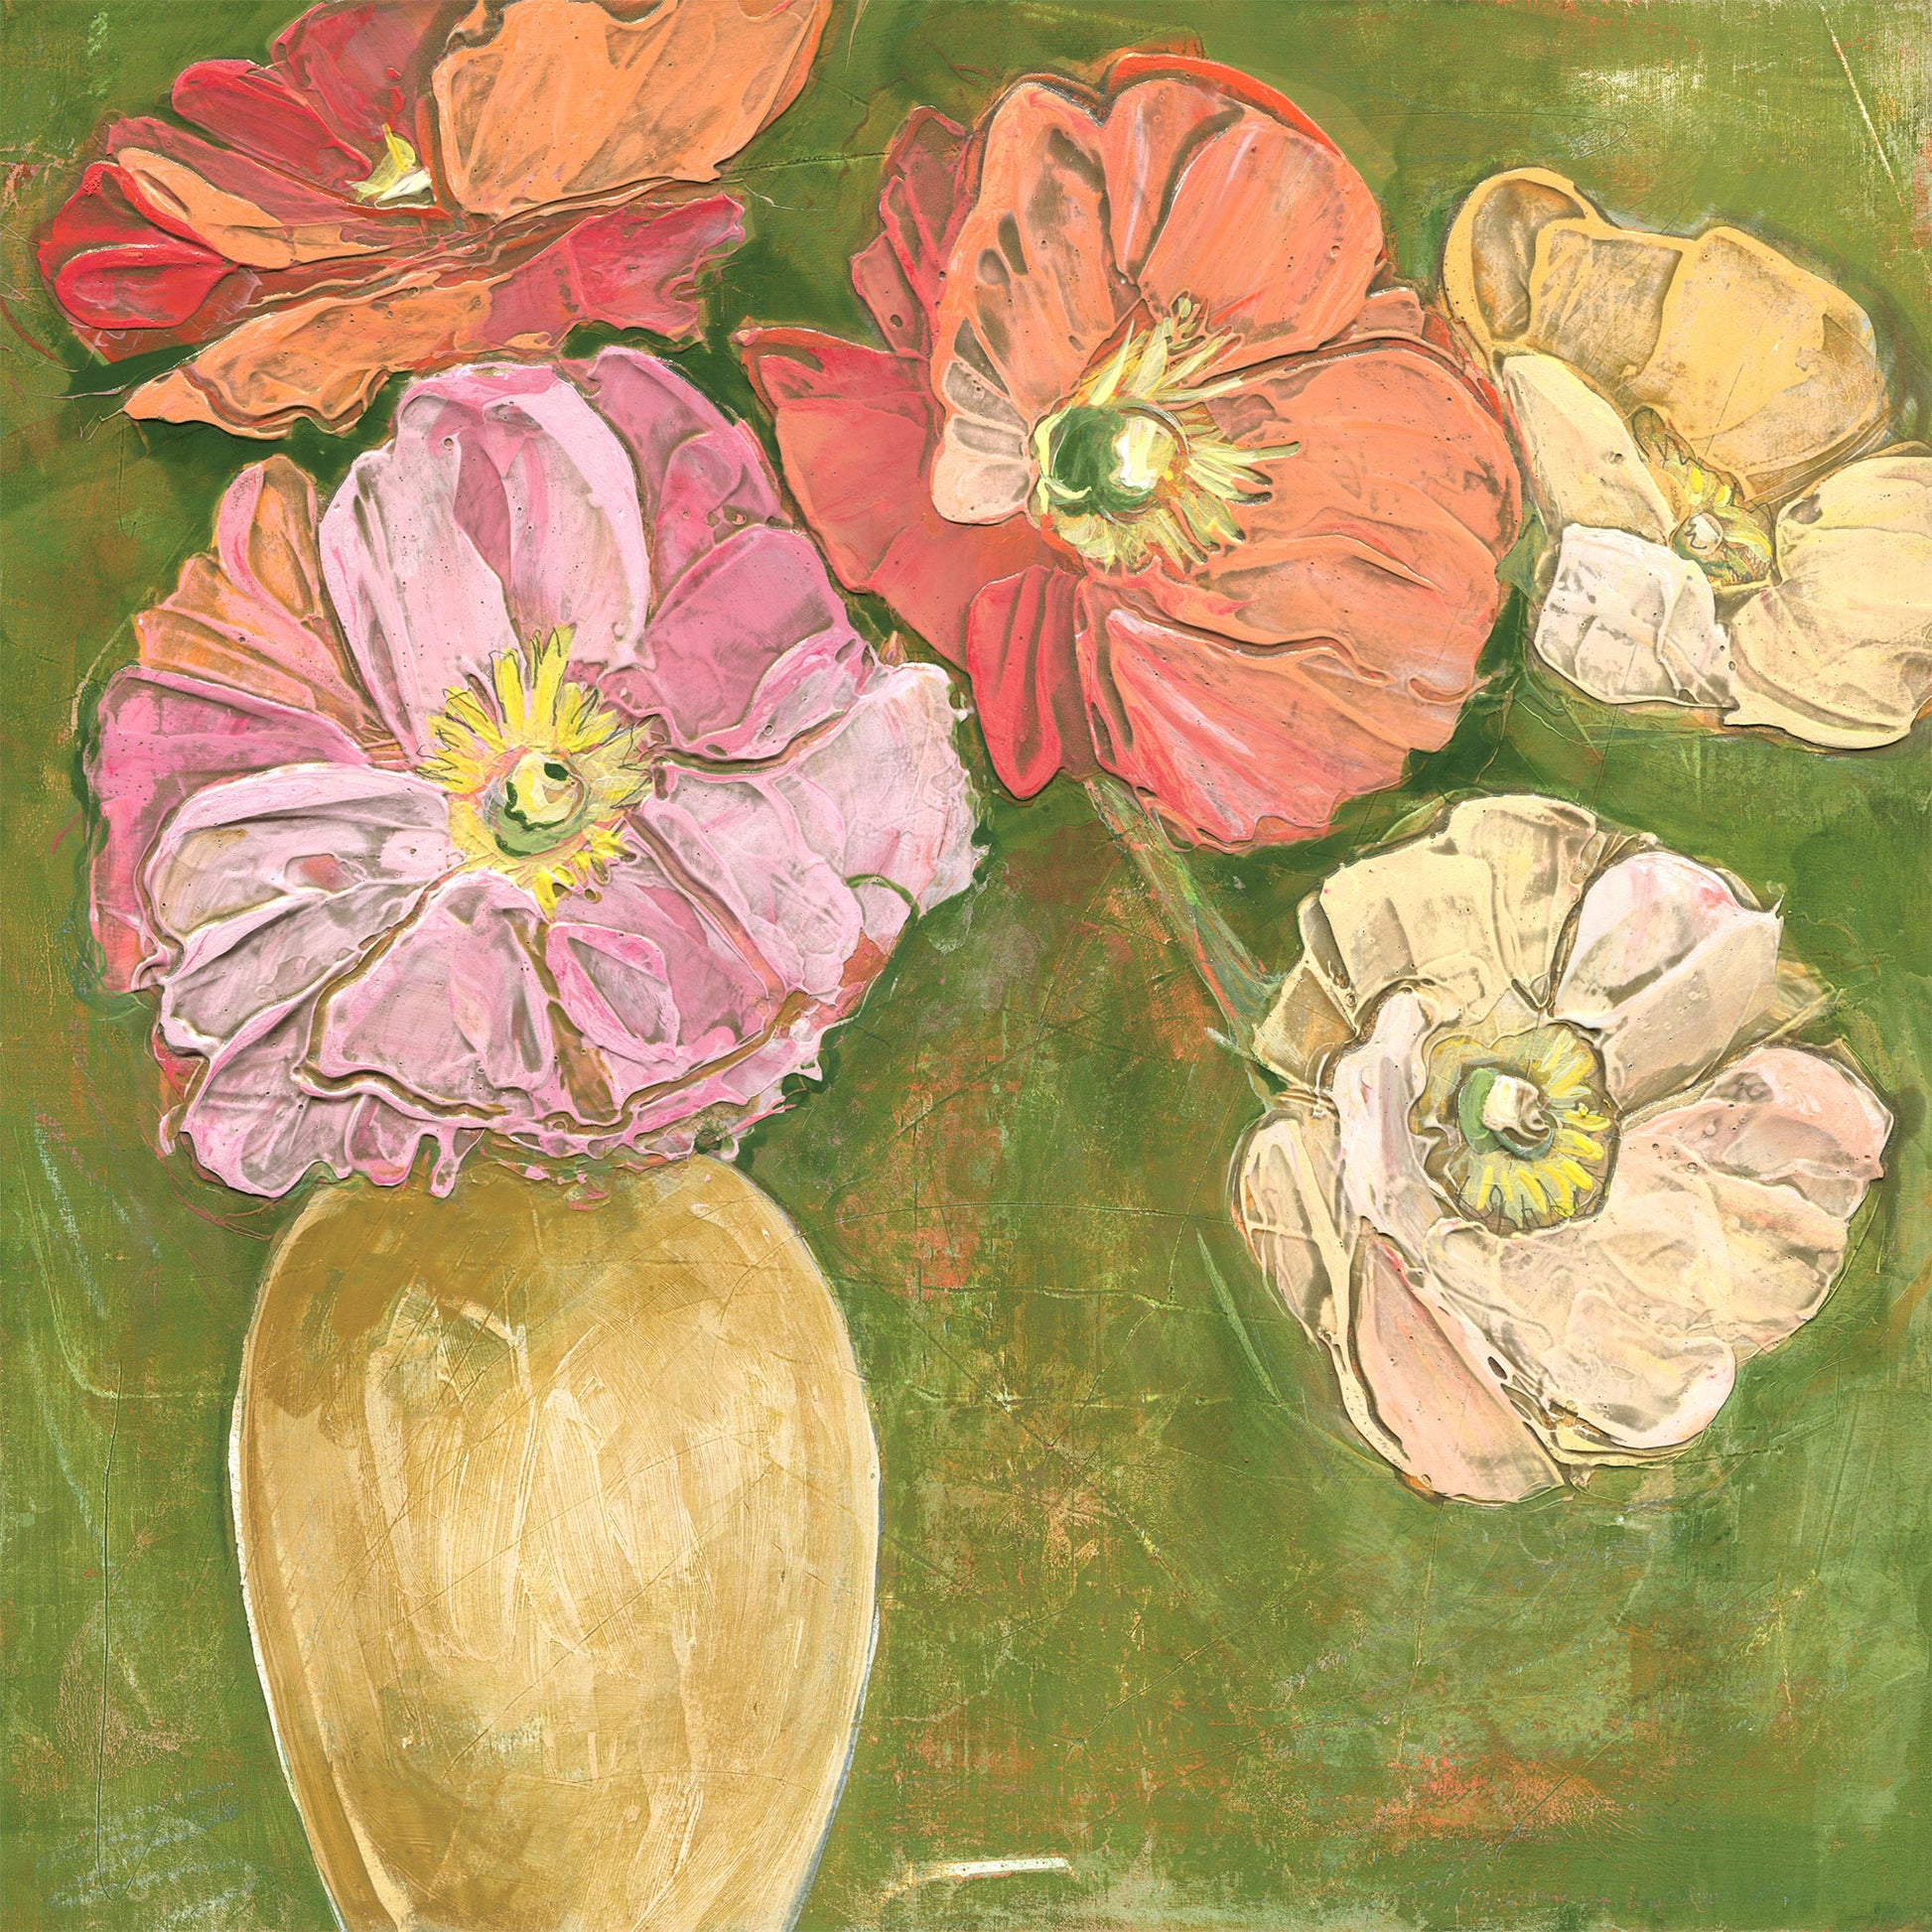 Textured acrylic painting featuring salmon pink, white, and light pink poppies with yellow centers in a yellow vase on a warm green background.